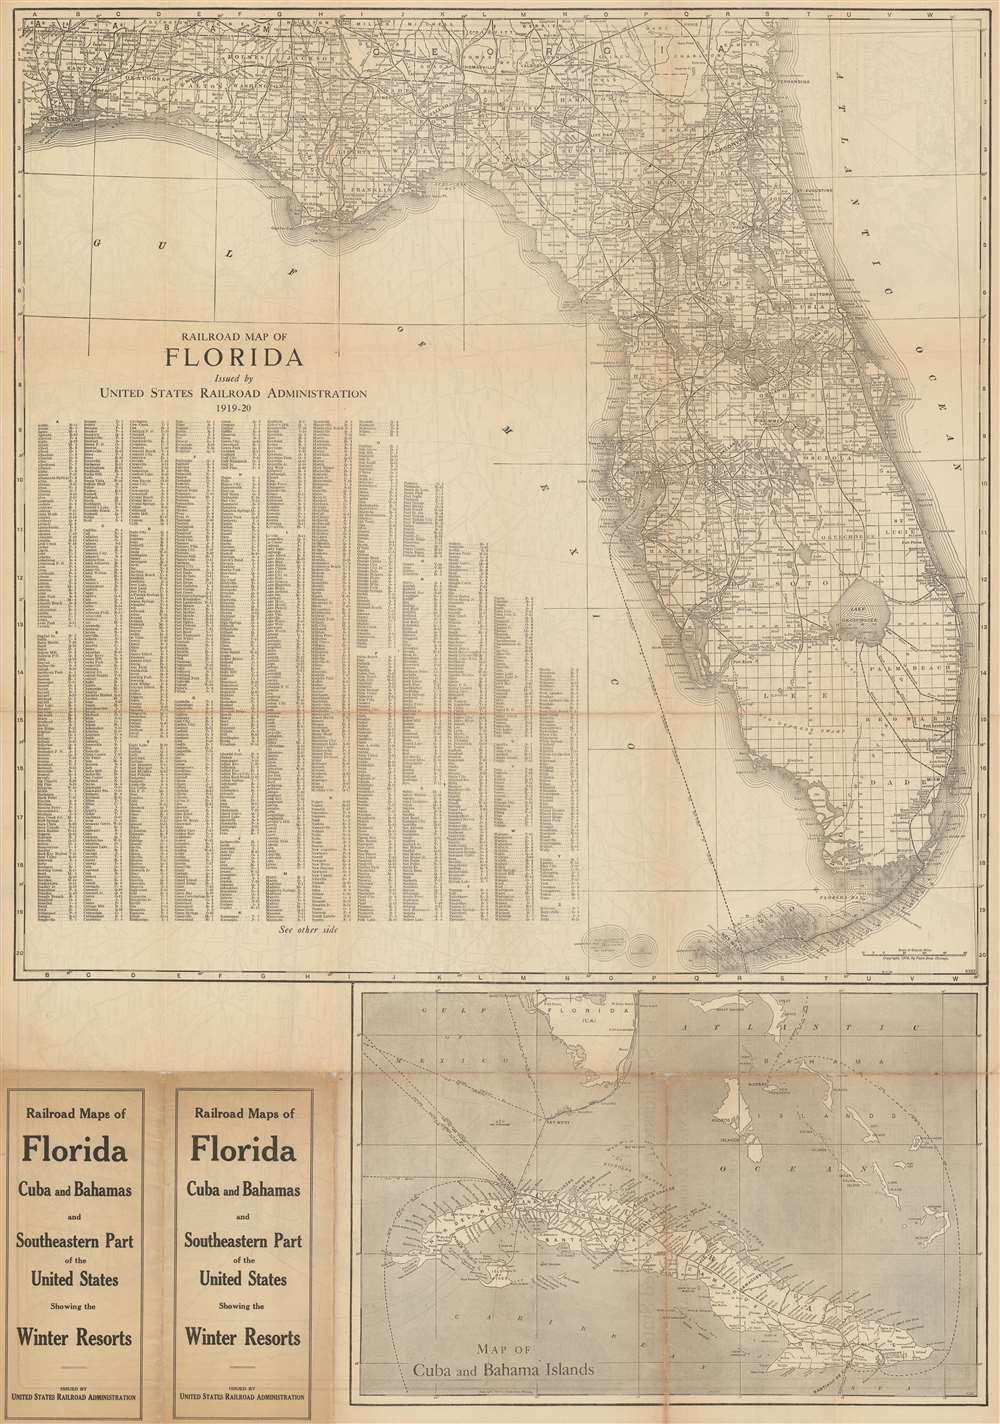 Railroad Map of Florida Issued by United States Railroad Administration 1919-20. - Main View